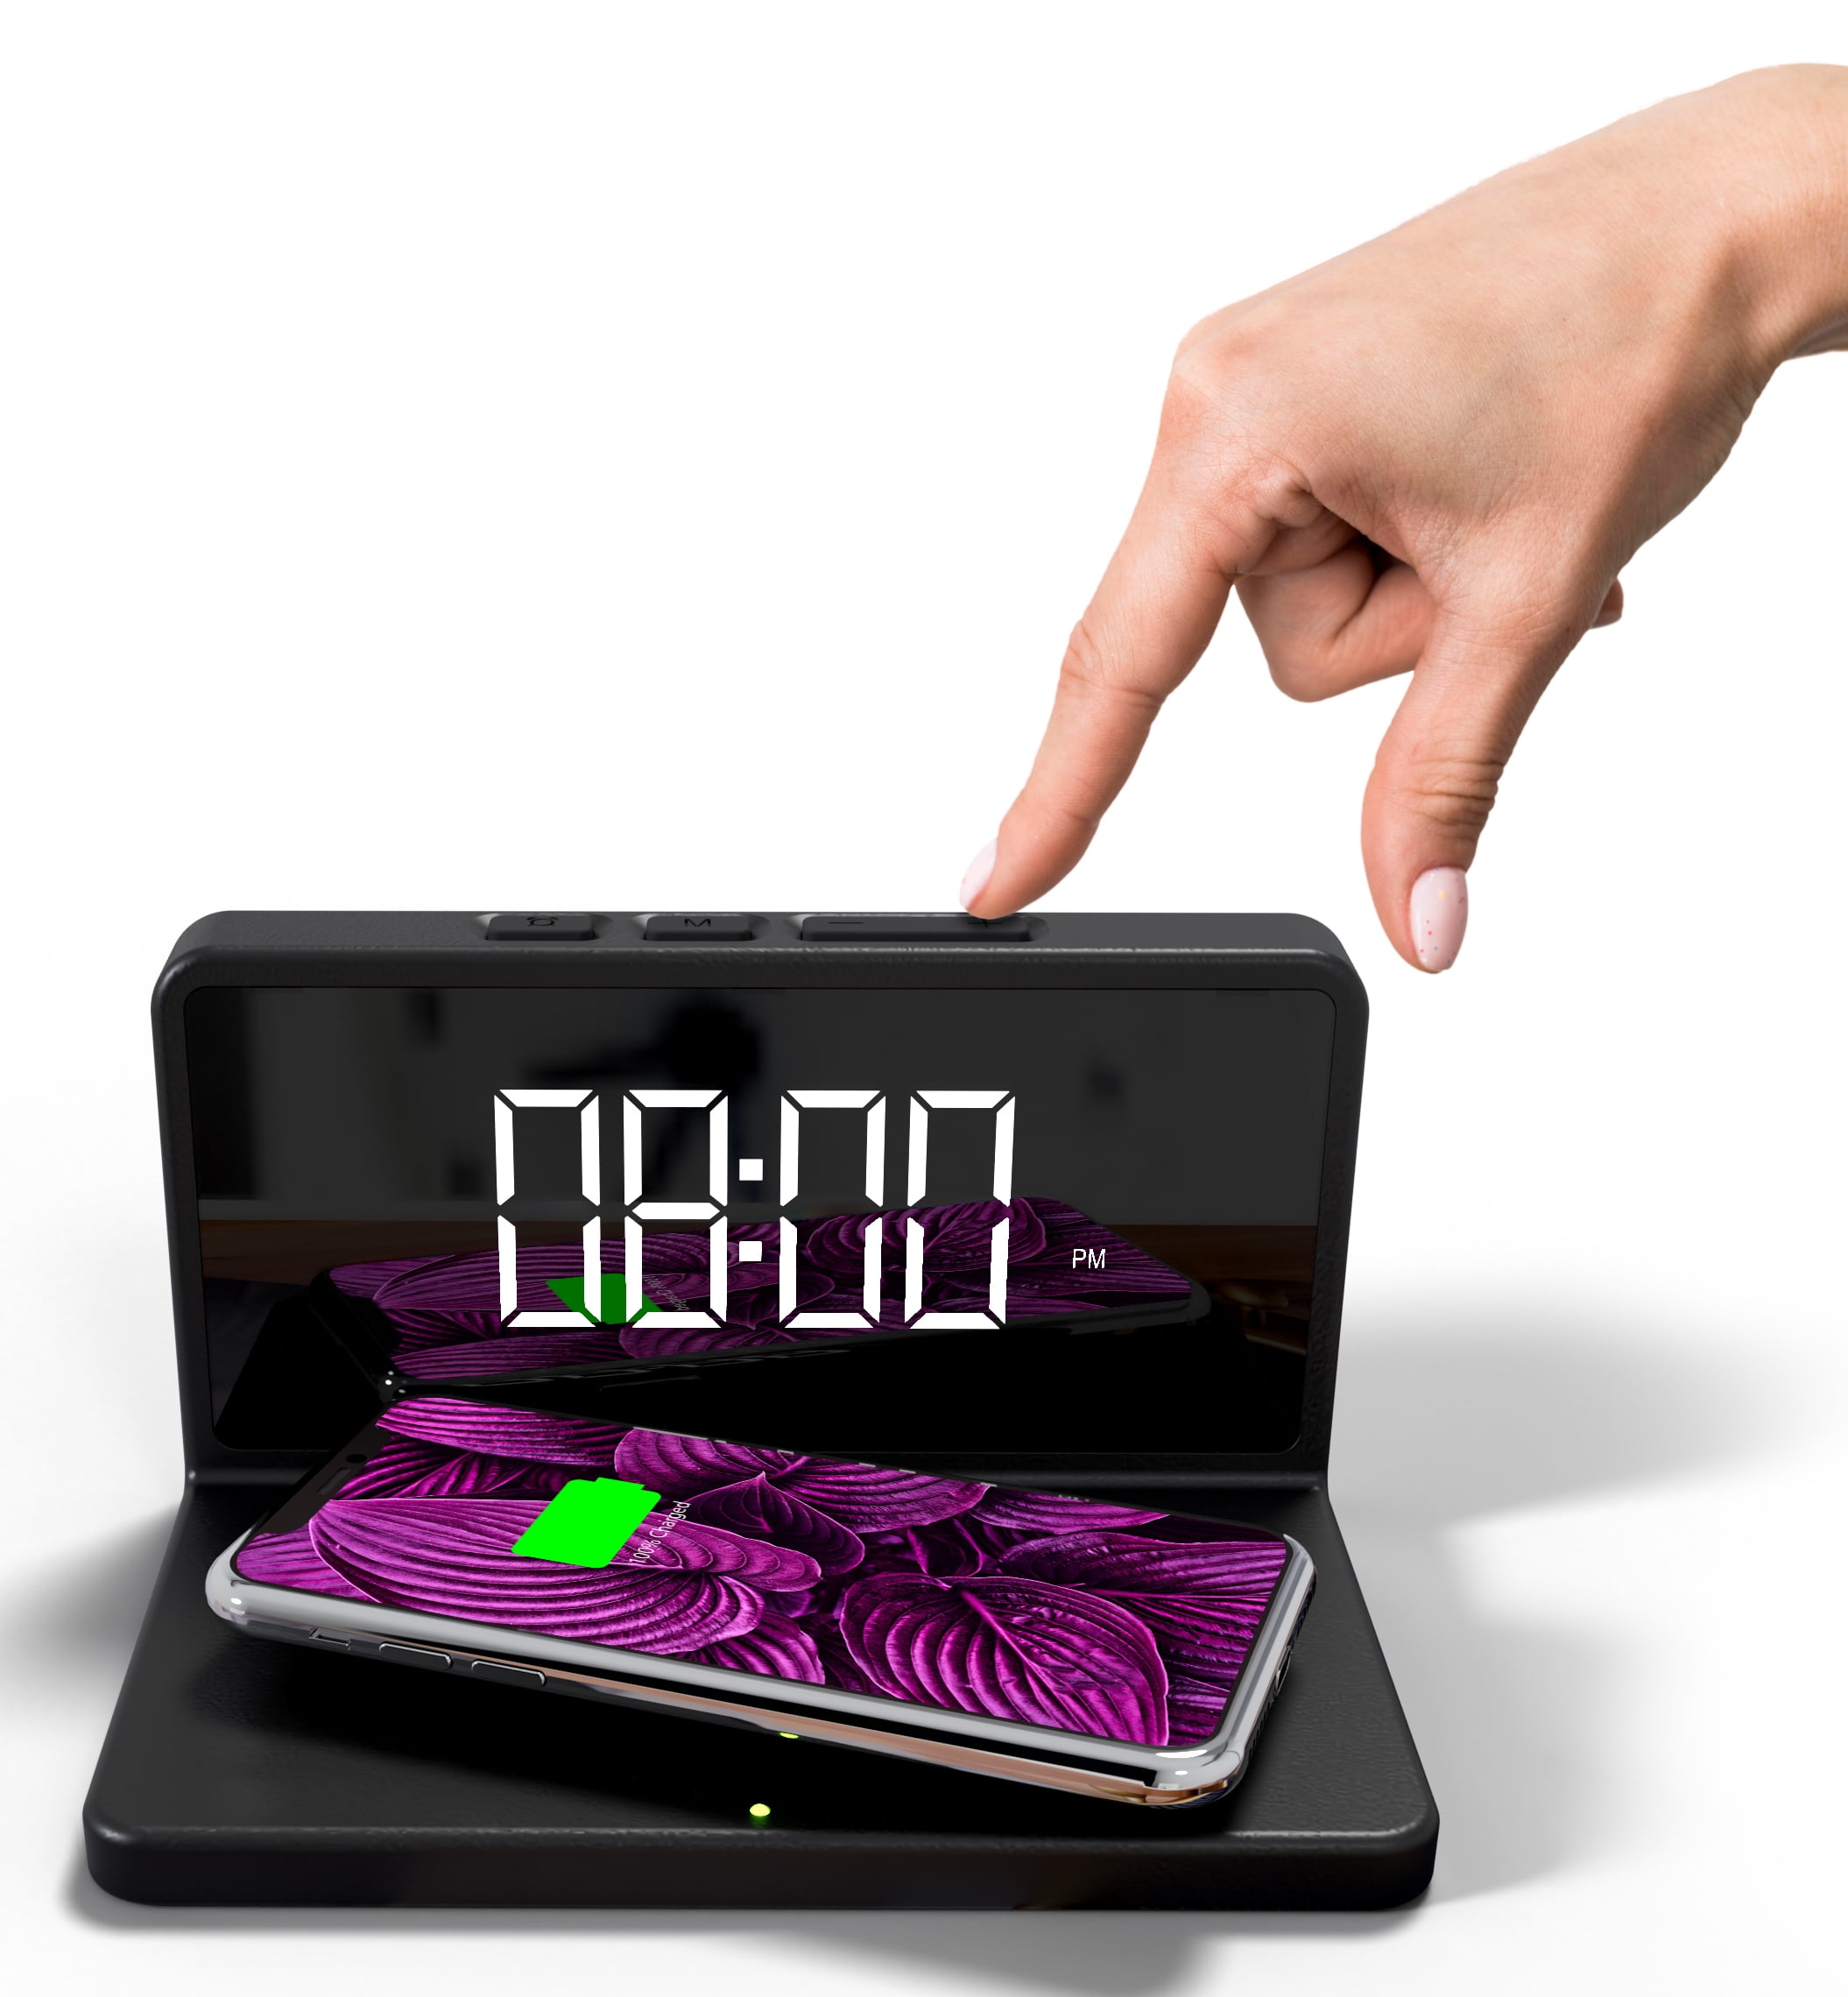 Premier LED Digital Clock and Wireless Mobile Charger for Home, Office, Black - Walmart.com